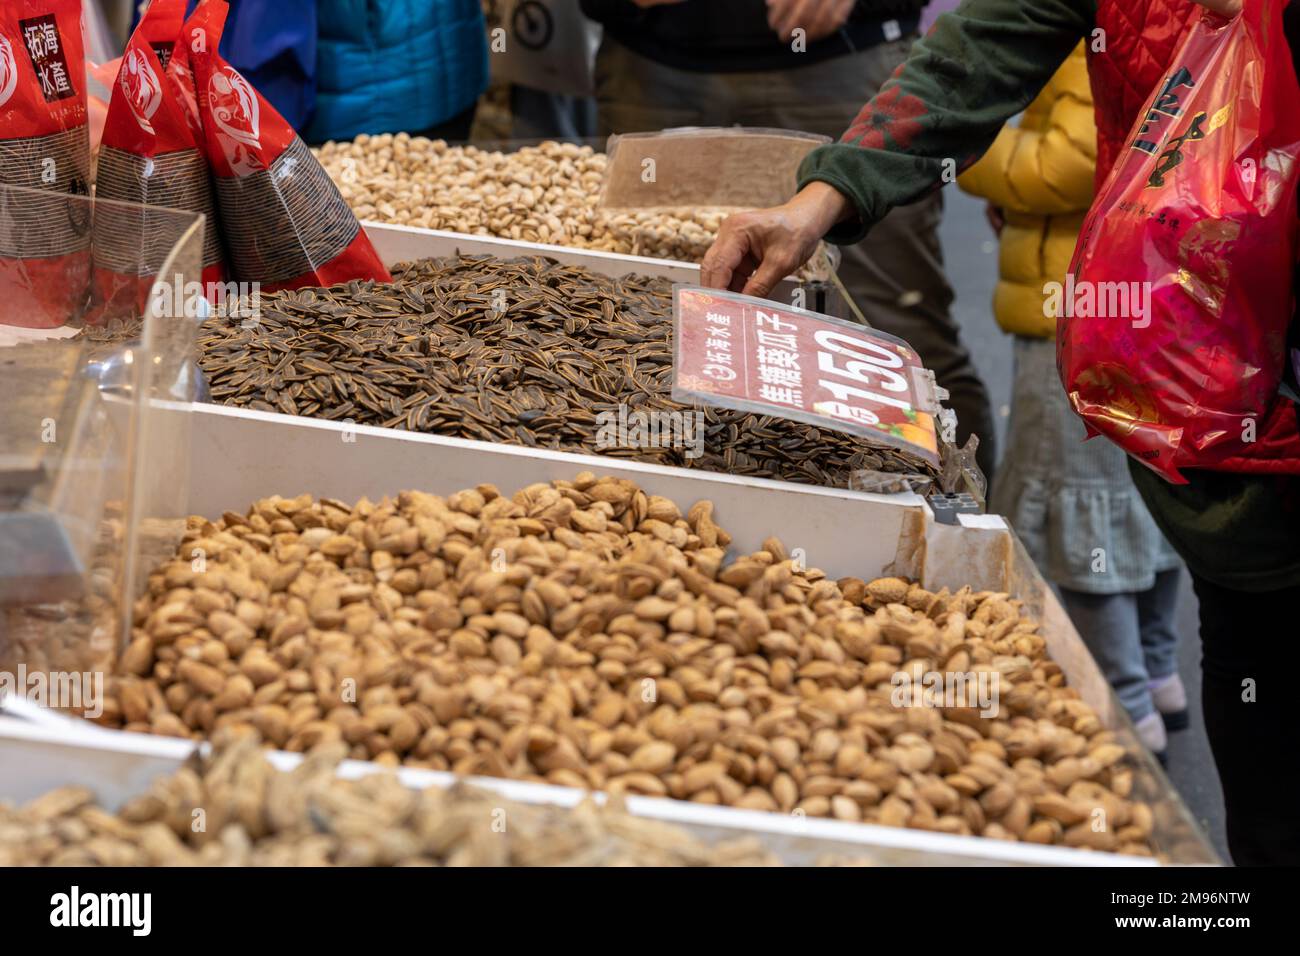 Sunflower seeds, pistachio nuts and peanuts on sale at Dihua Street New Year's market in Taipei ahead of the Lunar New Year and the Year of the Rabbit Stock Photo